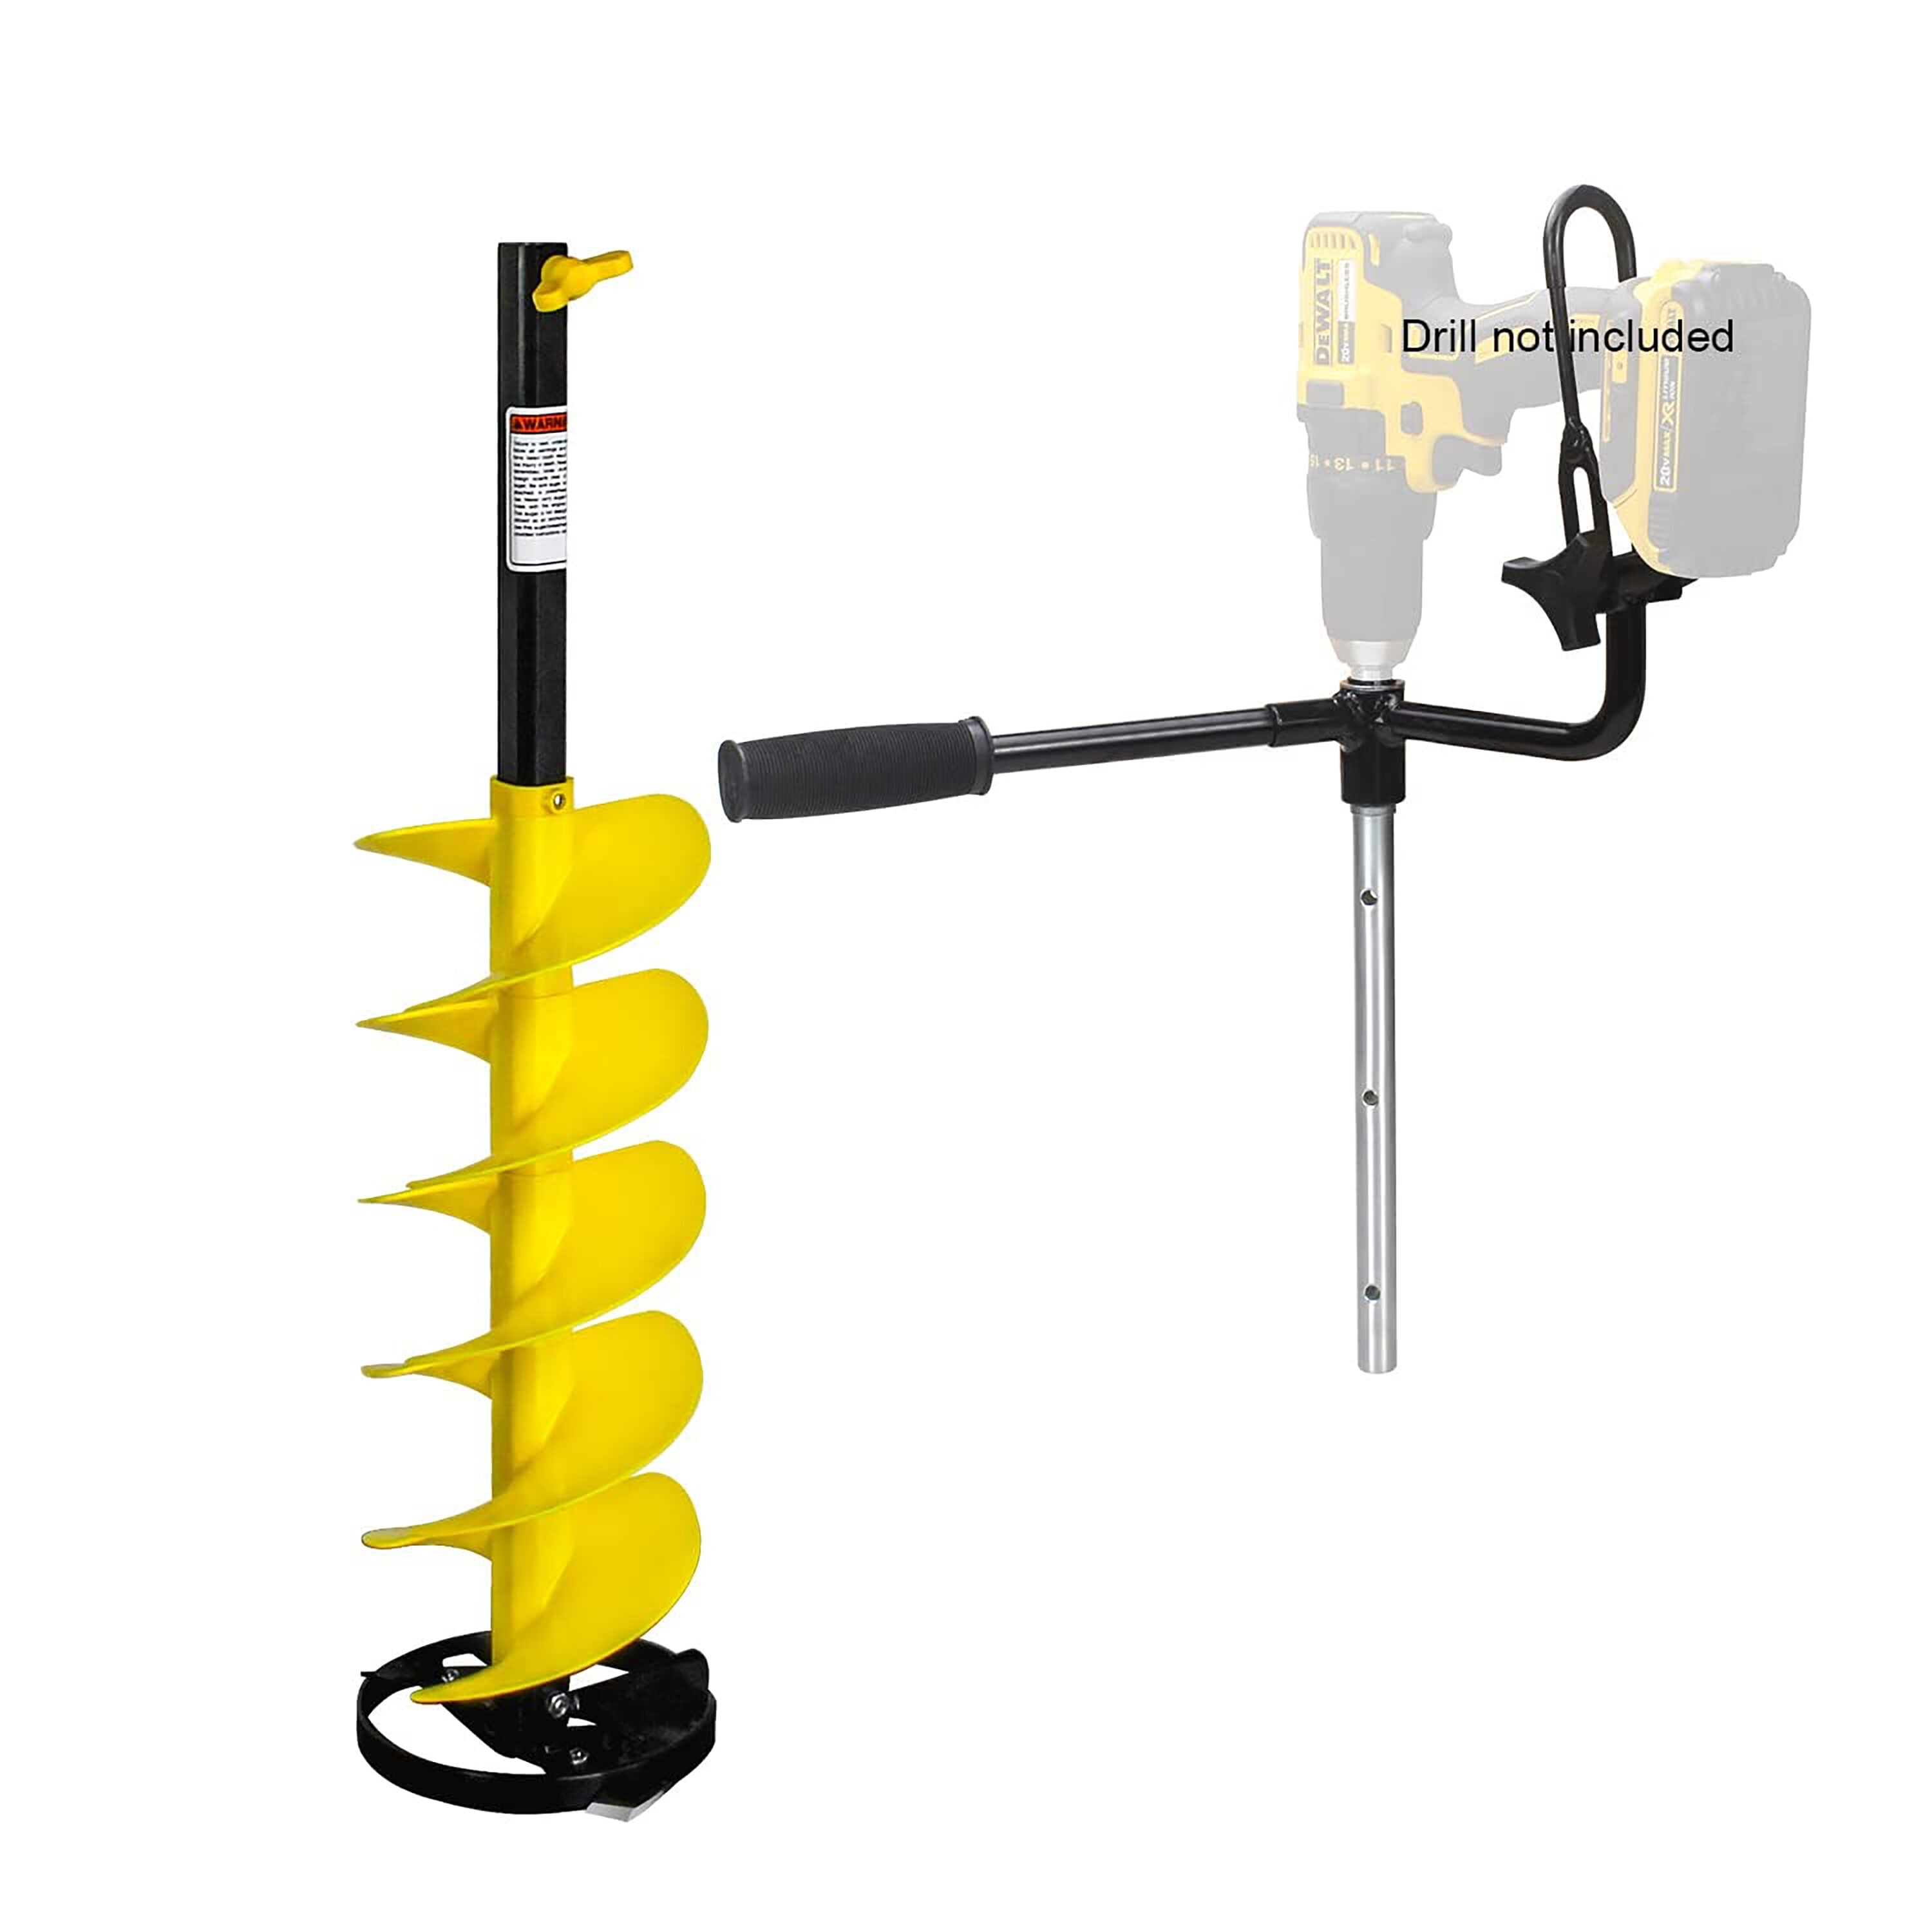 ThunderBay Ice Auger 8-in Ice Auger Bit at